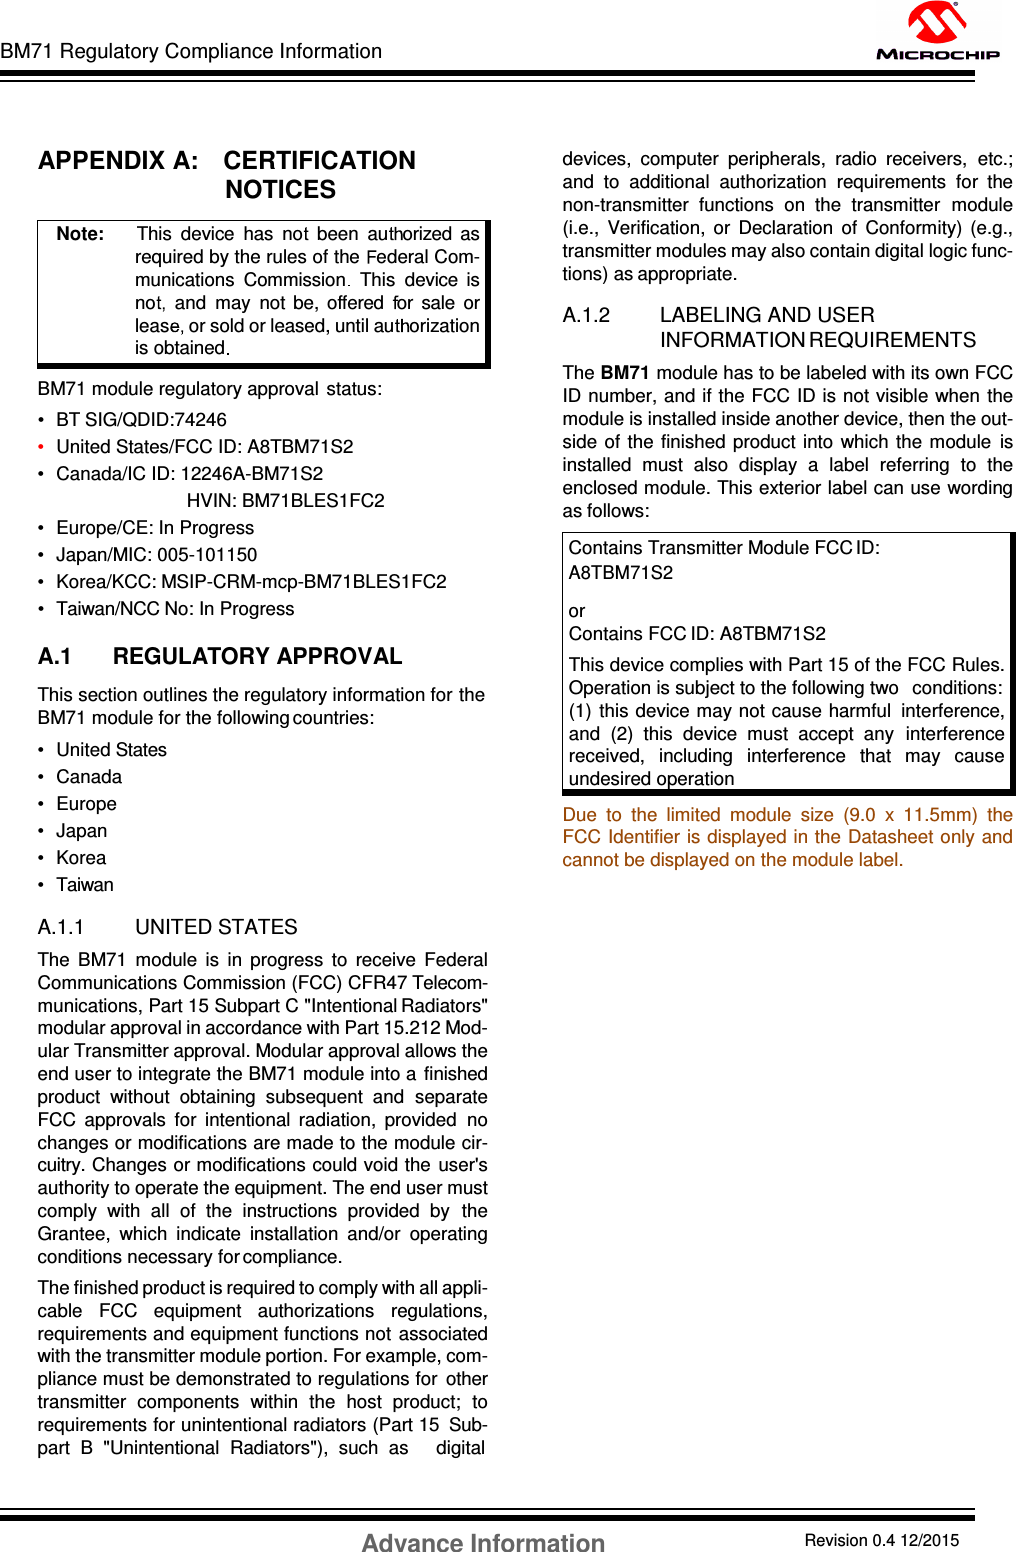 BM71 Regulatory Compliance Information Advance Information Revision 0.4 12/2015 DS60001372C-Page 54      APPENDIX A:    CERTIFICATION NOTICES   BM71 module regulatory approval   status: •  BT SIG/QDID:74246 •  United States/FCC ID: A8TBM71S2 •  Canada/IC ID: 12246A-BM71S2                                                 HVIN: BM71BLES1FC2 •  Europe/CE: In Progress •  Japan/MIC: 005-101150 •  Korea/KCC: MSIP-CRM-mcp-BM71BLES1FC2 •  Taiwan/NCC No: In Progress  A.1 REGULATORY APPROVAL This section outlines the regulatory information for the BM71 module for the following countries: •  United States •  Canada •  Europe •  Japan •  Korea •  Taiwan  A.1.1 UNITED STATES The  BM71  module  is  in  progress  to  receive  Federal Communications Commission (FCC) CFR47 Telecom- munications, Part 15 Subpart C &quot;Intentional Radiators&quot; modular approval in accordance with Part 15.212 Mod- ular Transmitter approval. Modular approval allows the end user to integrate the BM71 module into a  finished product  without  obtaining  subsequent  and  separate FCC  approvals  for  intentional  radiation,  provided  no changes or modifications are made to the module cir- cuitry. Changes or modifications could void the  user&apos;s authority to operate the equipment. The end user must comply  with  all  of  the  instructions  provided  by  the Grantee,  which  indicate  installation  and/or  operating conditions necessary for compliance. The finished product is required to comply with all appli- cable  FCC  equipment  authorizations  regulations, requirements and equipment functions not  associated with the transmitter module portion. For example, com- pliance must be demonstrated to regulations for  other transmitter  components  within  the  host  product;  to requirements for unintentional radiators (Part 15  Sub- part  B  &quot;Unintentional  Radiators&quot;),  such  as     digital devices,  computer  peripherals,  radio  receivers,  etc.; and  to  additional  authorization  requirements  for  the non-transmitter  functions  on  the  transmitter  module (i.e.,  Verification,  or  Declaration  of  Conformity)  (e.g., transmitter modules may also contain digital logic func- tions) as appropriate.  A.1.2 LABELING AND USER INFORMATION REQUIREMENTS The BM71 module has to be labeled with its own FCC ID number, and if the FCC ID is not visible when  the module is installed inside another device, then the out- side  of the  finished  product  into  which the  module  is installed  must  also  display  a  label  referring  to  the enclosed module. This exterior label can use wording as follows: Contains Transmitter Module FCC ID: A8TBM71S2  or Contains FCC ID: A8TBM71S2 This device complies with Part 15 of the FCC Rules. Operation is subject to the following two   conditions: (1)  this device may not cause harmful  interference, and  (2)  this  device  must  accept  any  interference received,  including  interference  that  may  cause undesired operation Due  to  the  limited  module  size  (9.0  x  11.5mm)  the FCC Identifier is displayed in the Datasheet only and cannot be displayed on the module label.                     Note:      This  device  has  no   been  au orized  as required by the rules of the  ederal Com- munications  Commission   This  device  is no   and  may  not  be,  offered   or  sale  or leas or sold or leased, until au orization is obtained  